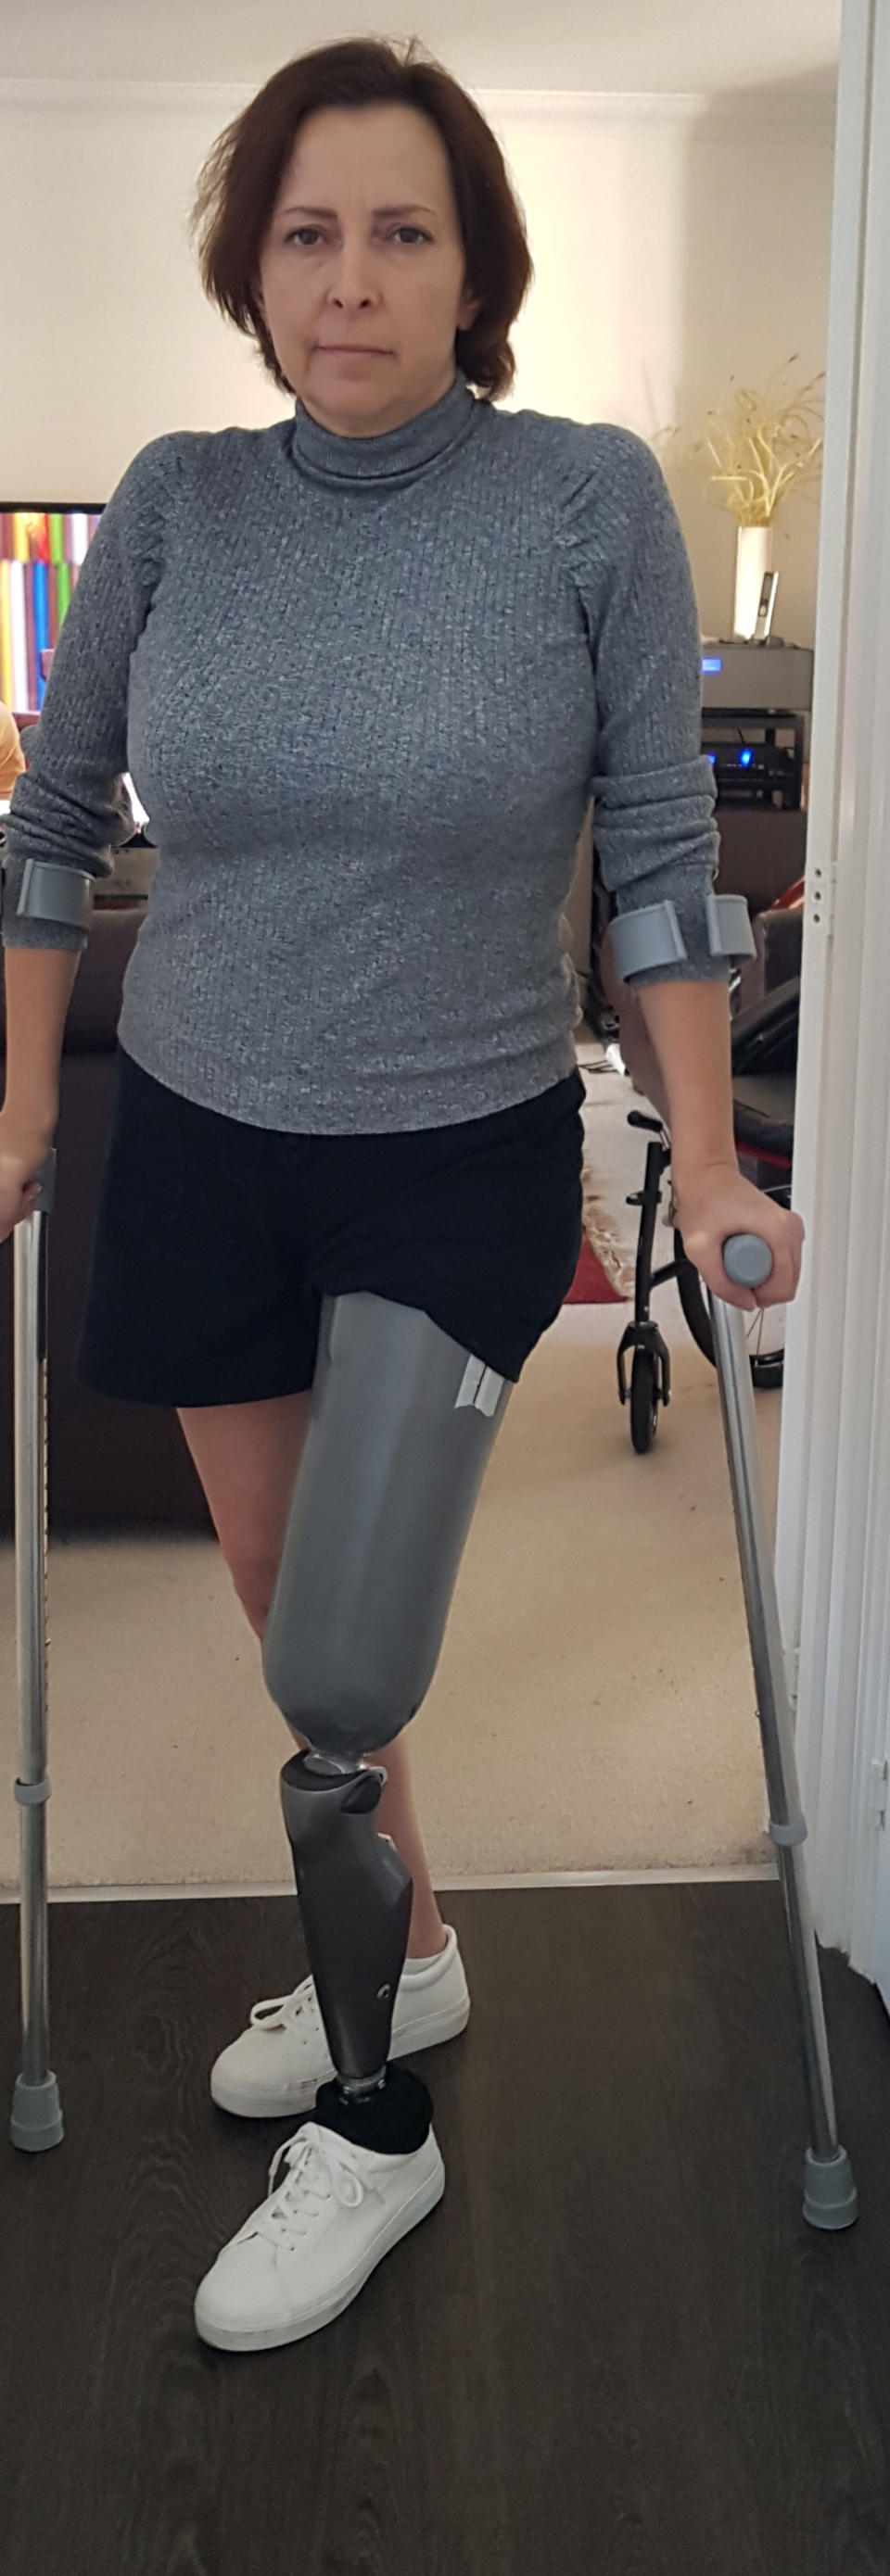 Helen Way, 49, received her prosthetic leg in Oct 2020. (Caters)